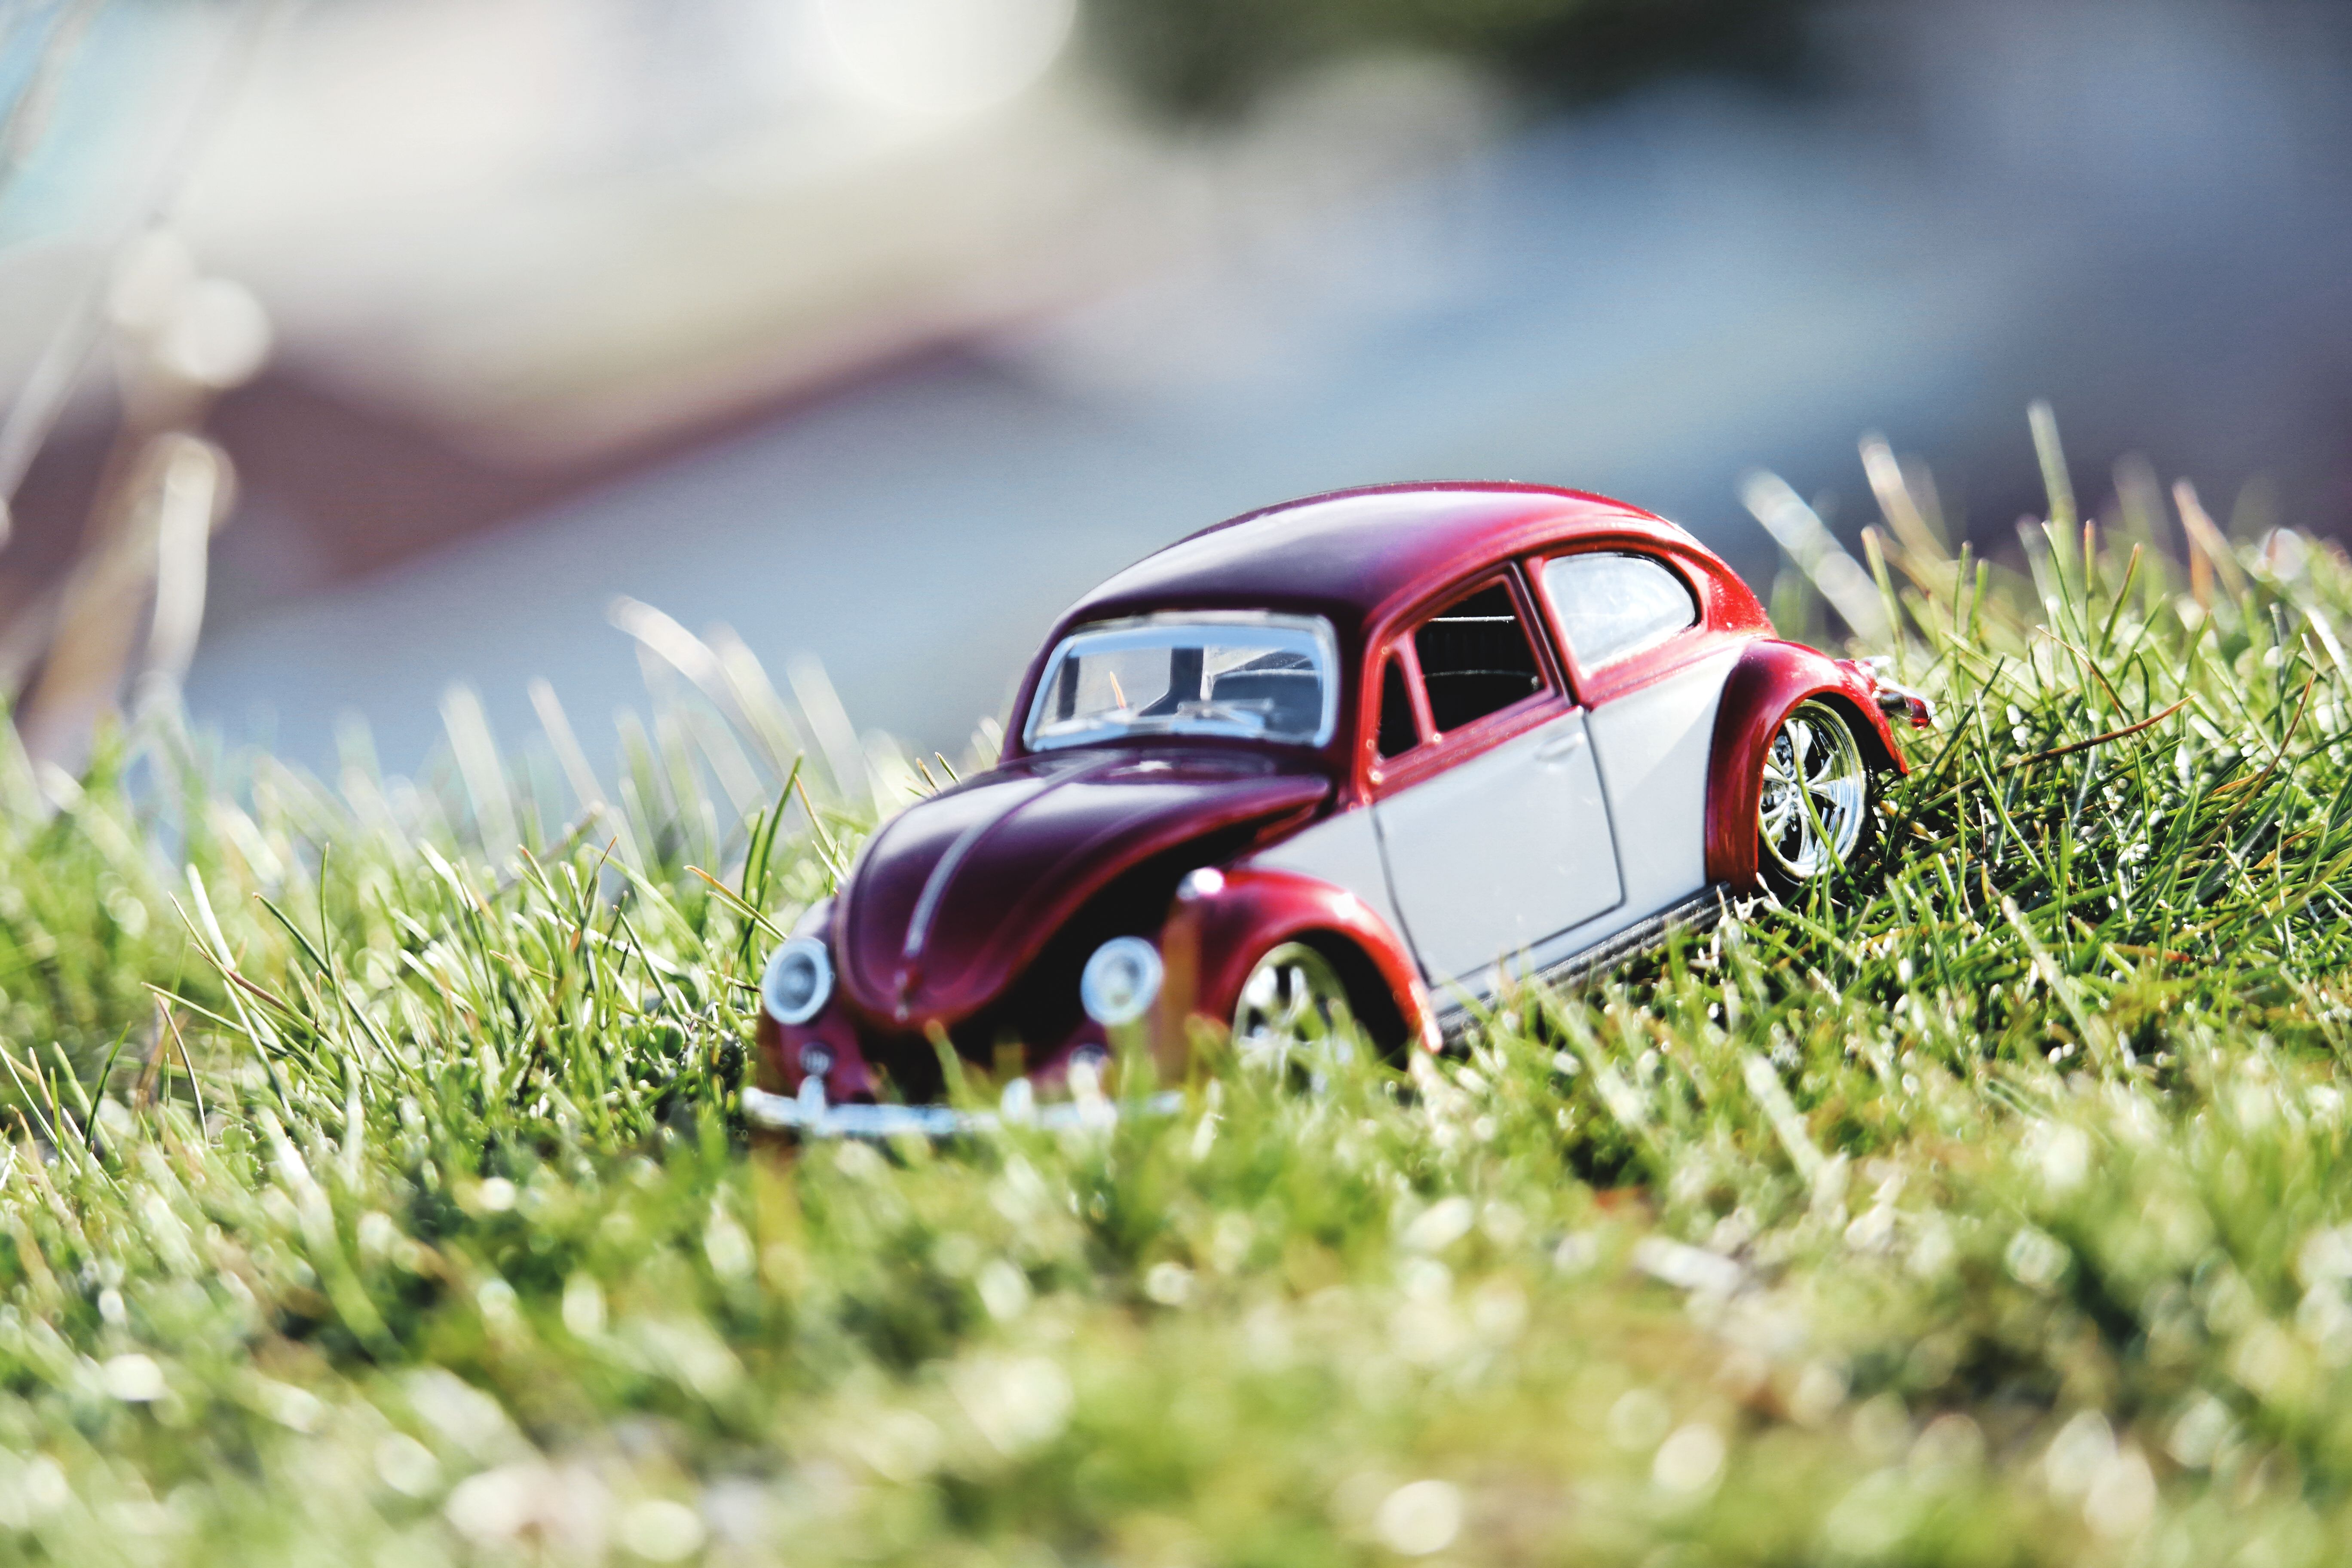 Red and White Beetle Car Toy on Grass Field in Bokeh Photography · Free